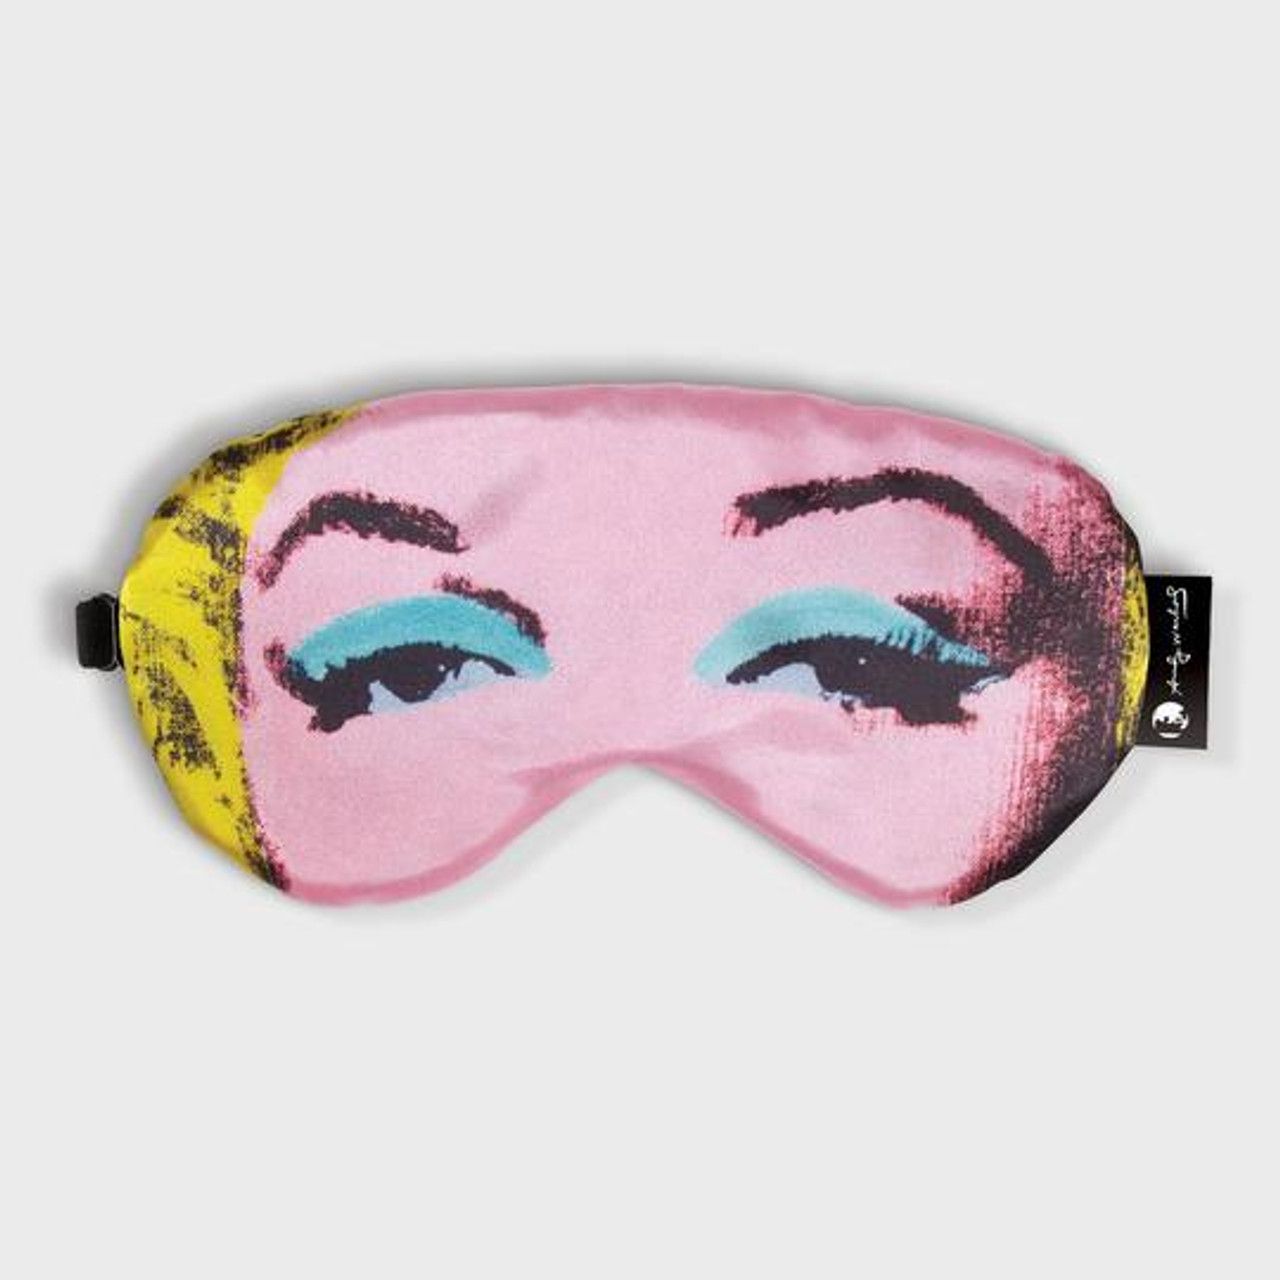 louisvuitton eye masks anyone? ✨ Inspired by: @mjs_drawing and